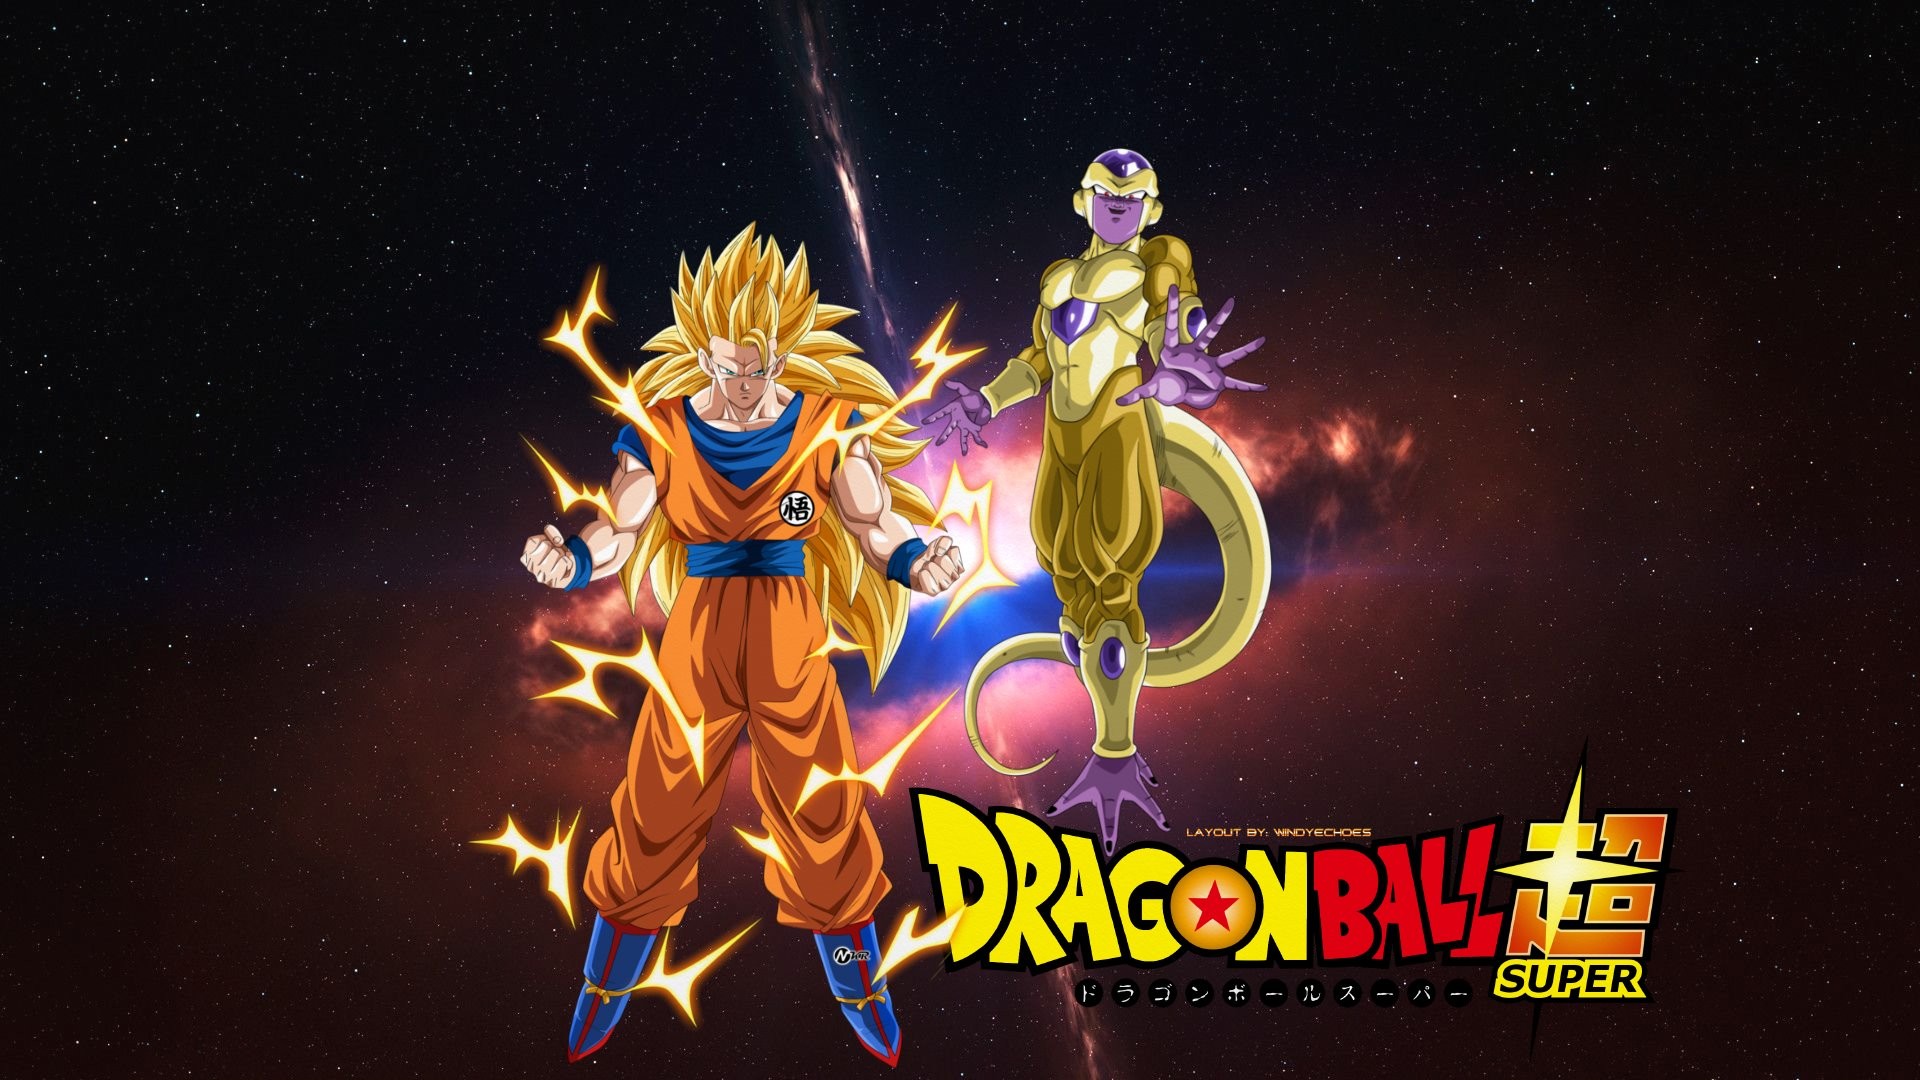 … Golden Frieza And SSJ 3 Goku – Tournament Of Power by WindyEchoes